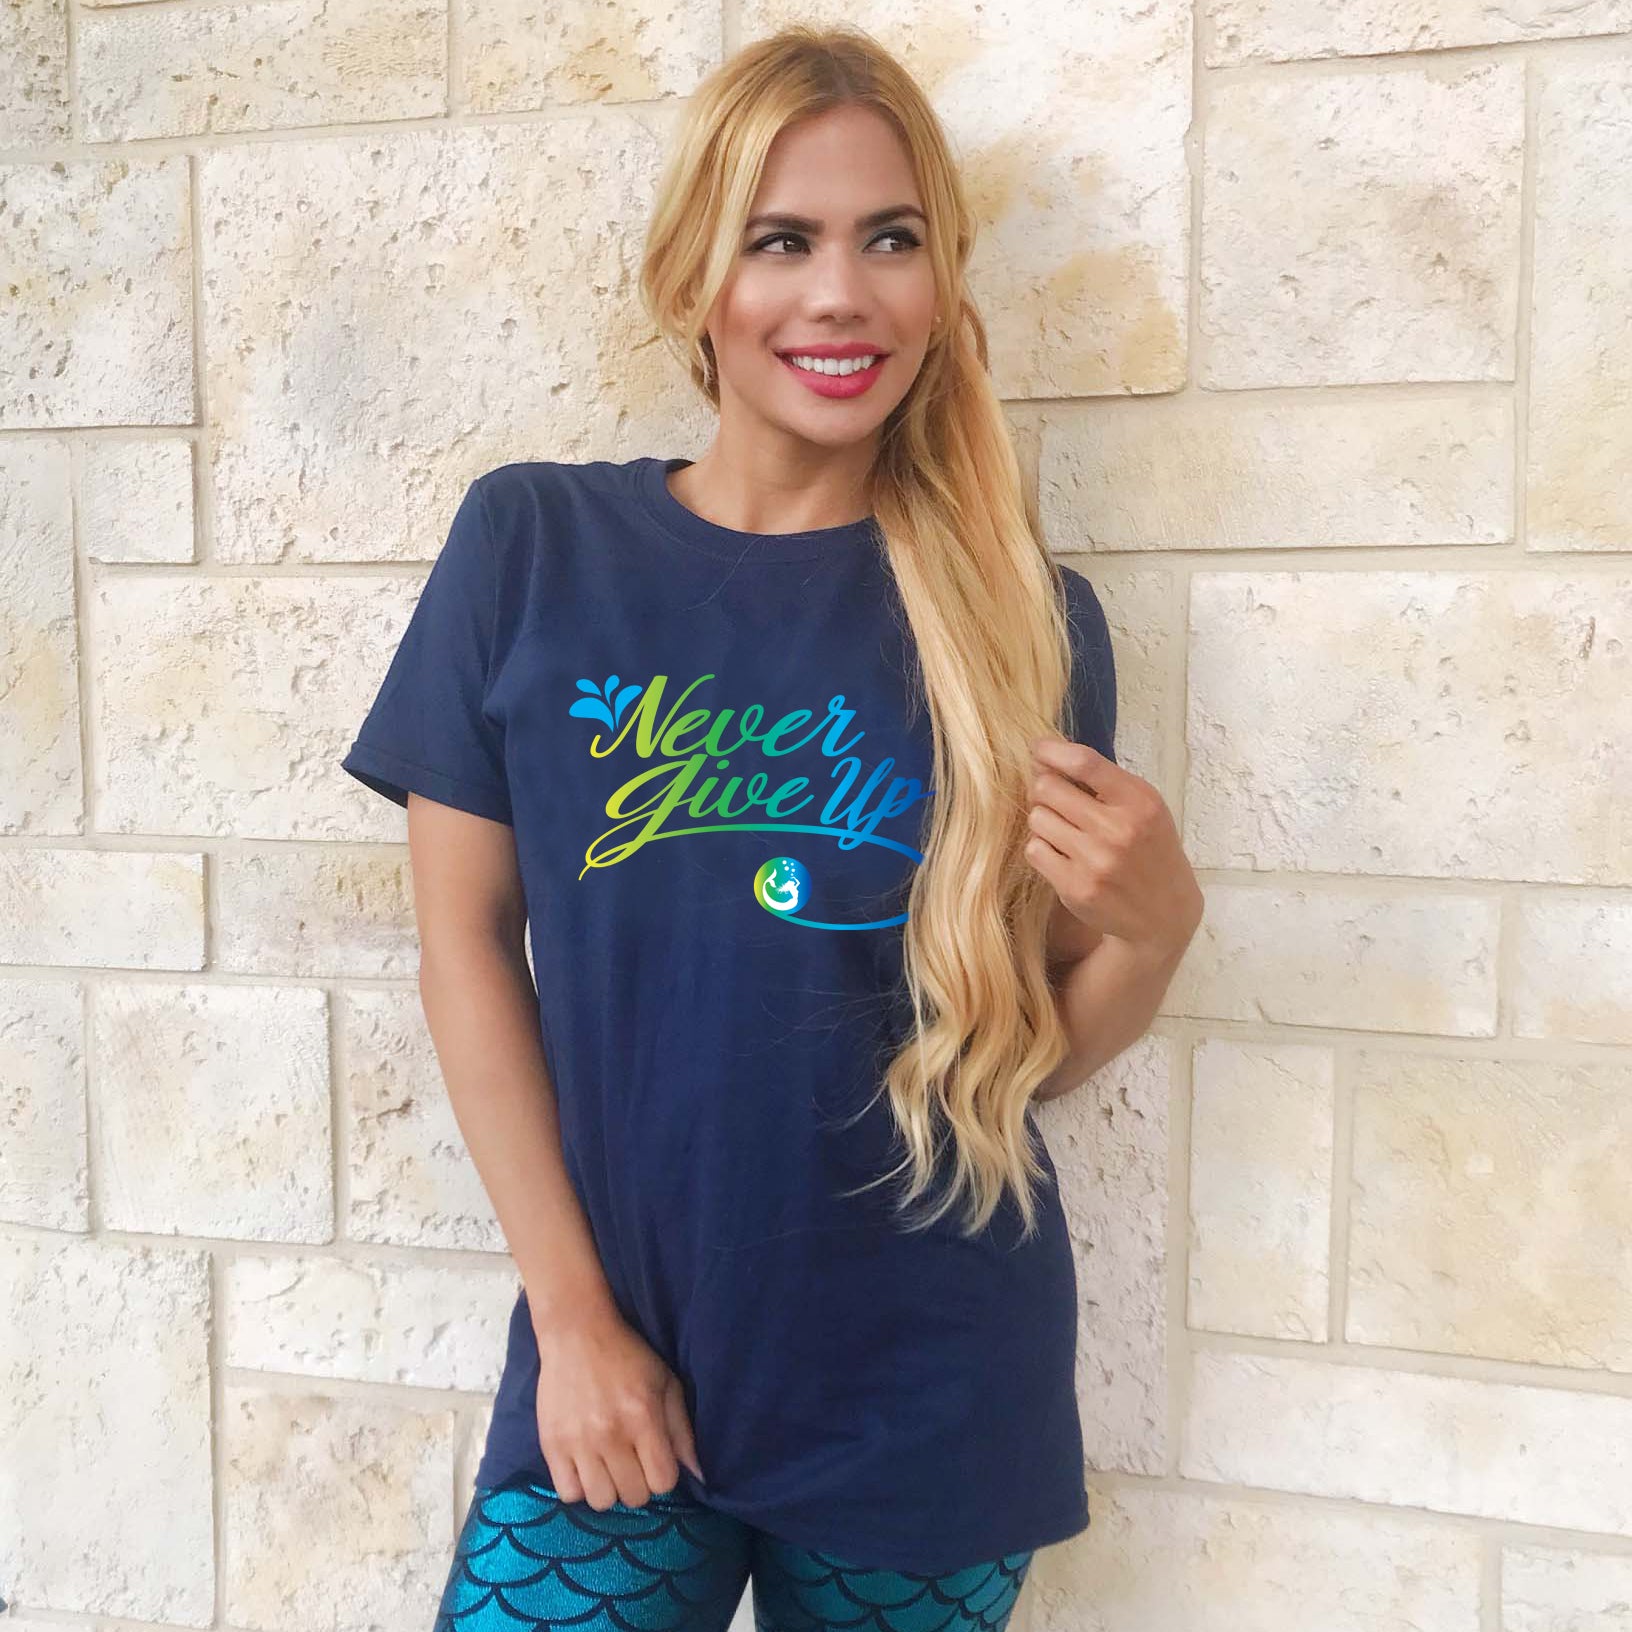 Introducing Mermaid Elle's "Never Give Up" Short-Sleeve Boyfriend Unisex T-Shirt by Cape Cali